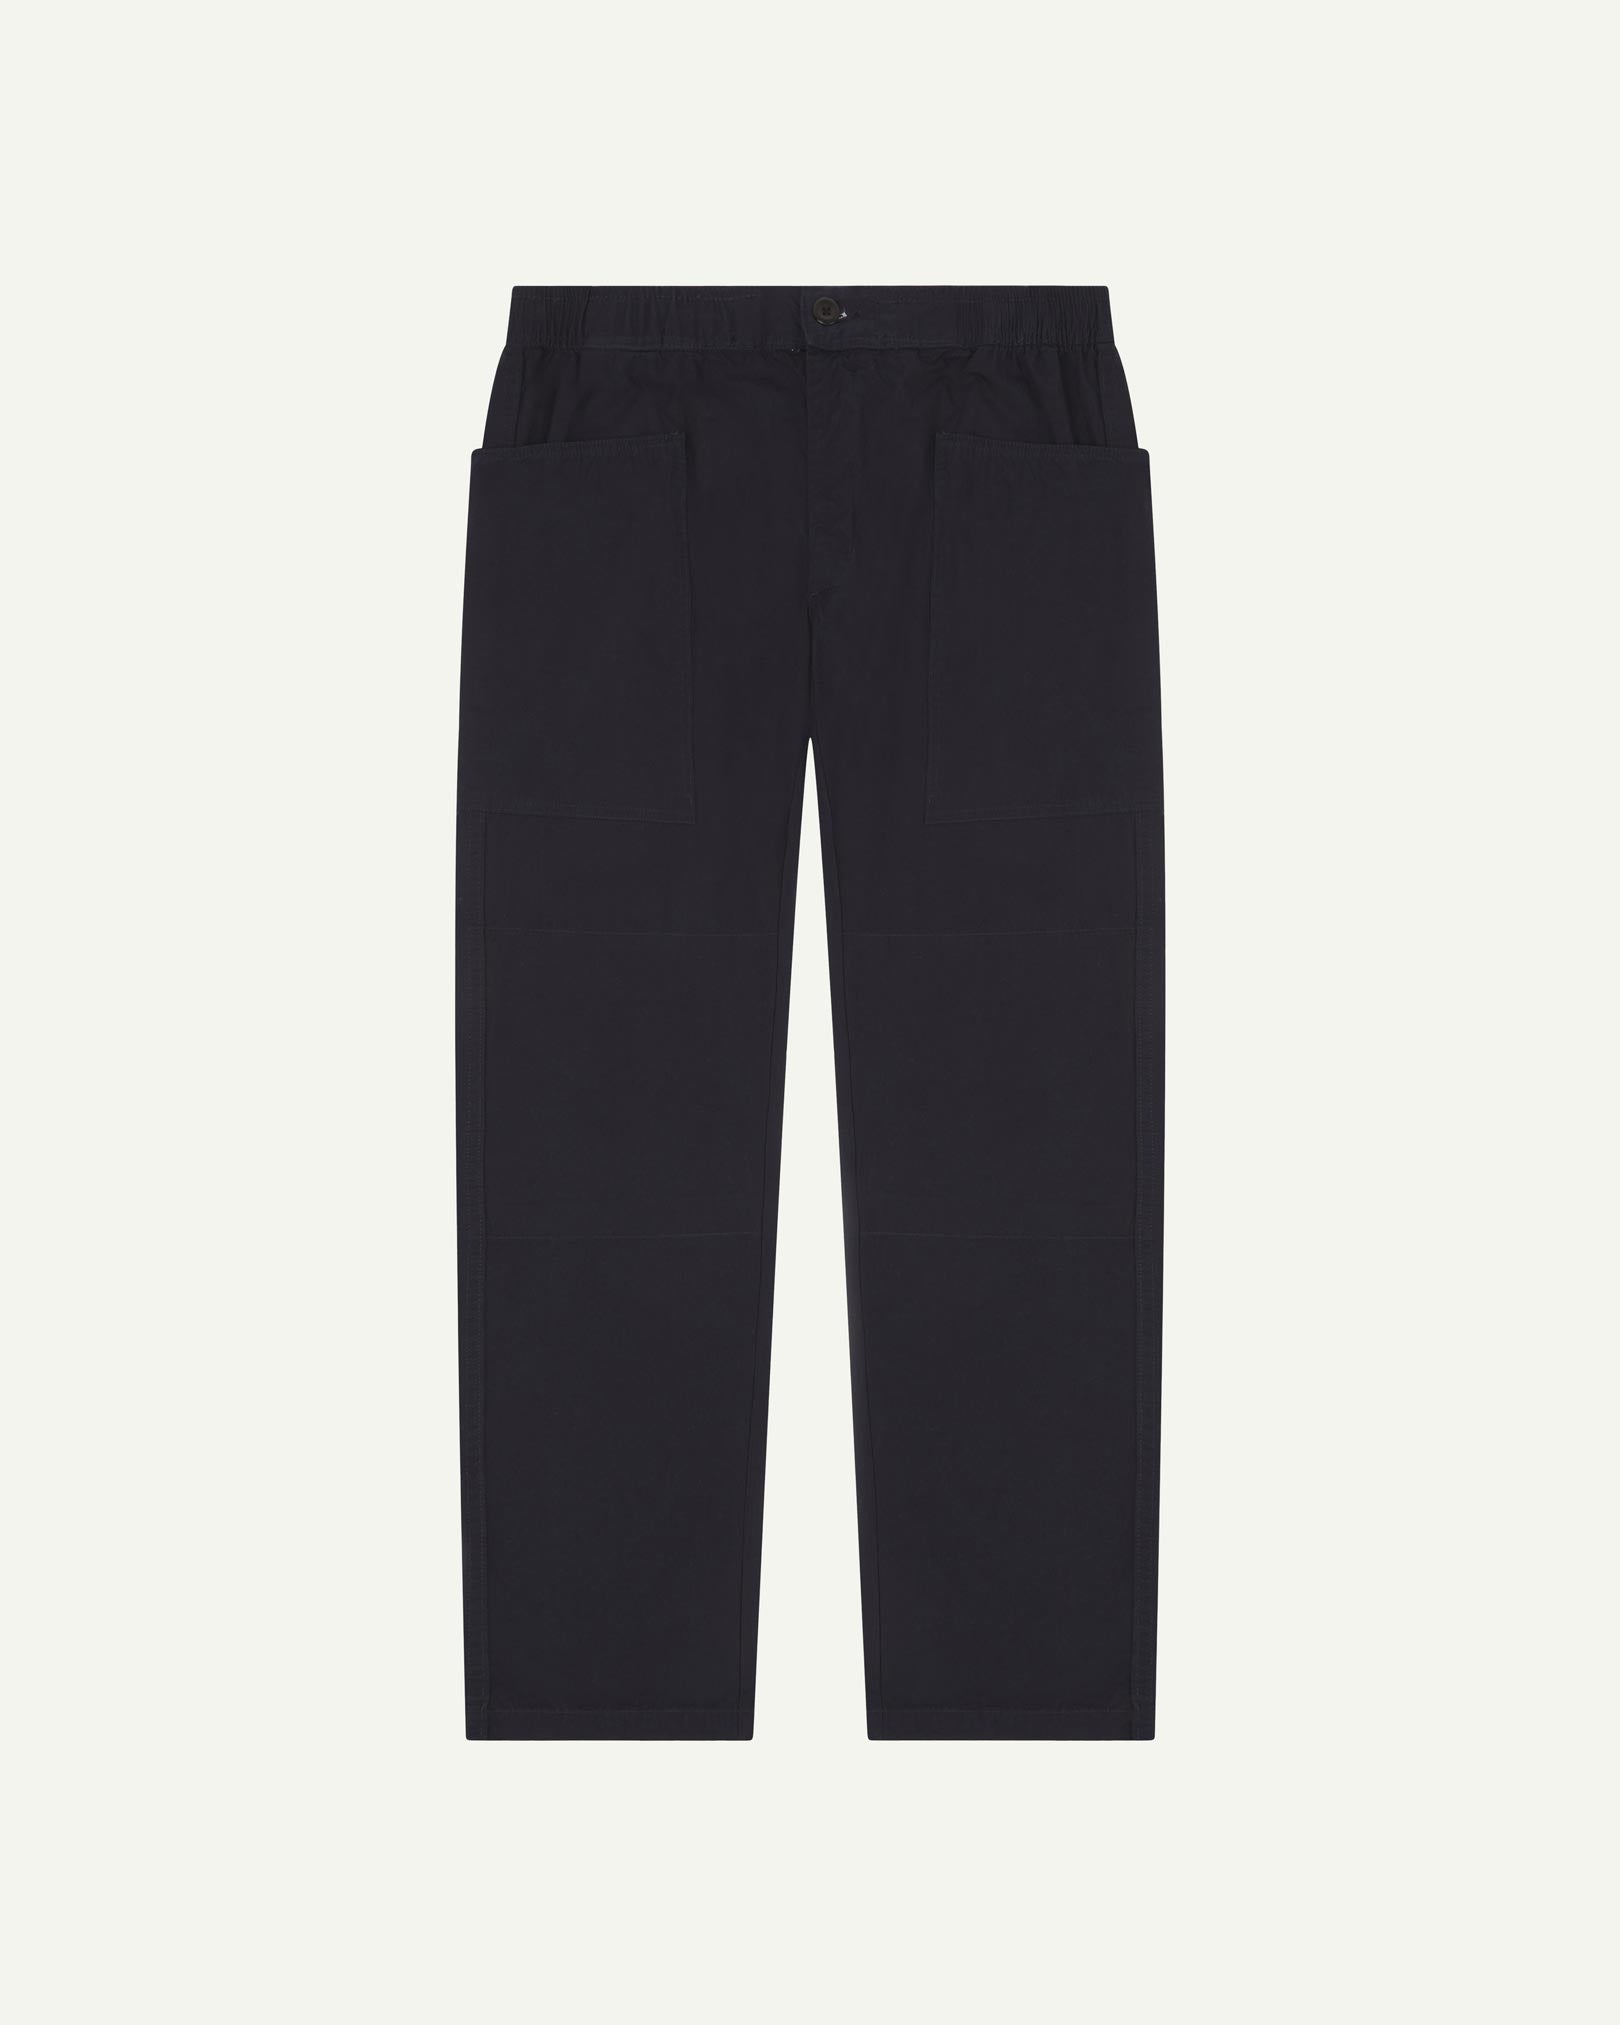 Front shot of 5011 Uskees men's organic 'midnight blue-green' casual trousers. Clearly showing the elasticated waist, front pockets and tapered leg.